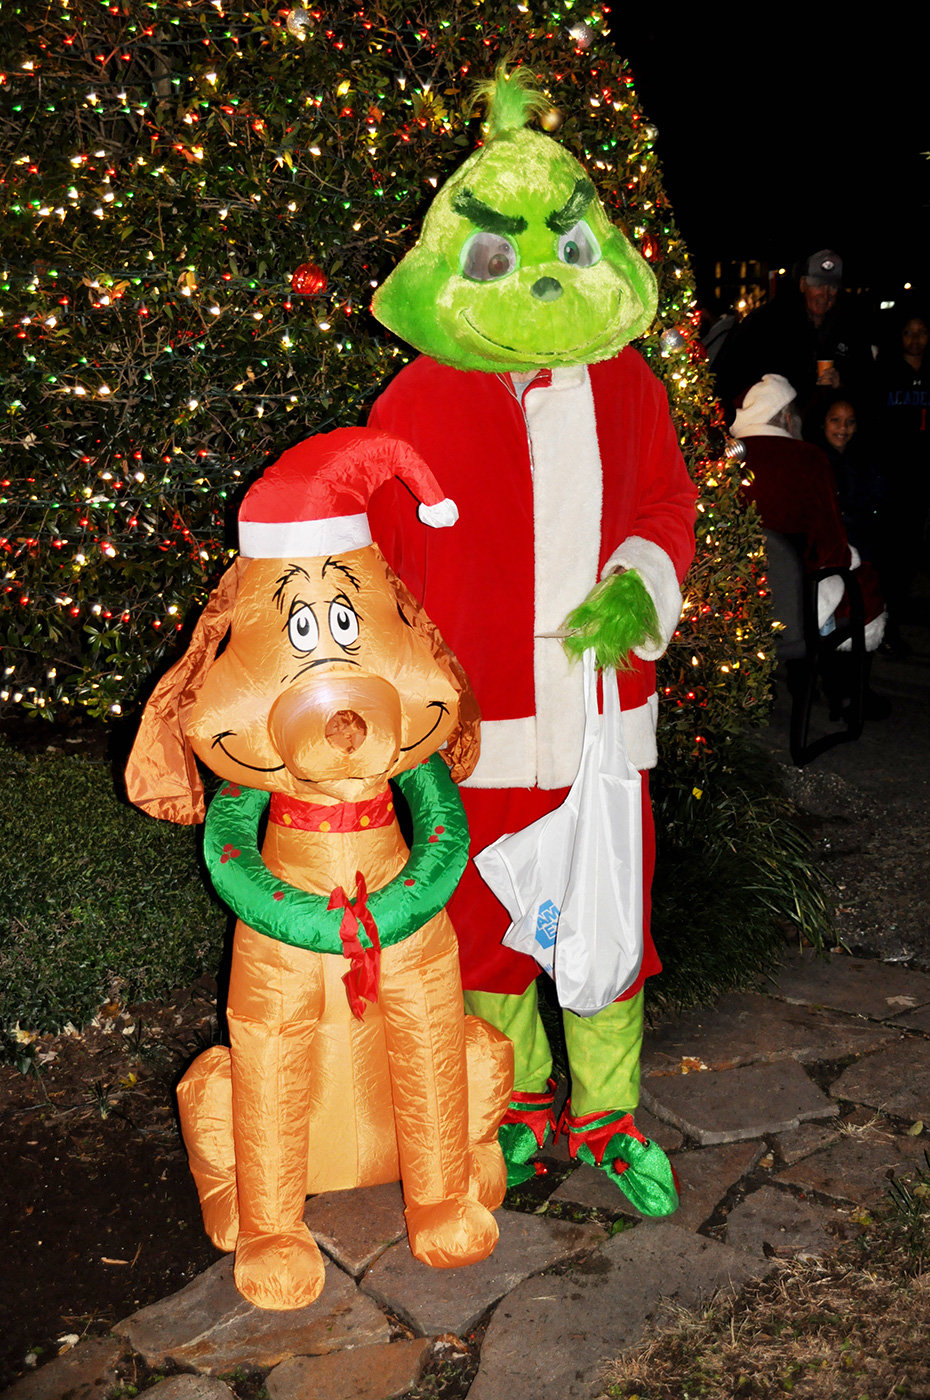 Jim League played the Grinch during the tree-lighting ceremony.